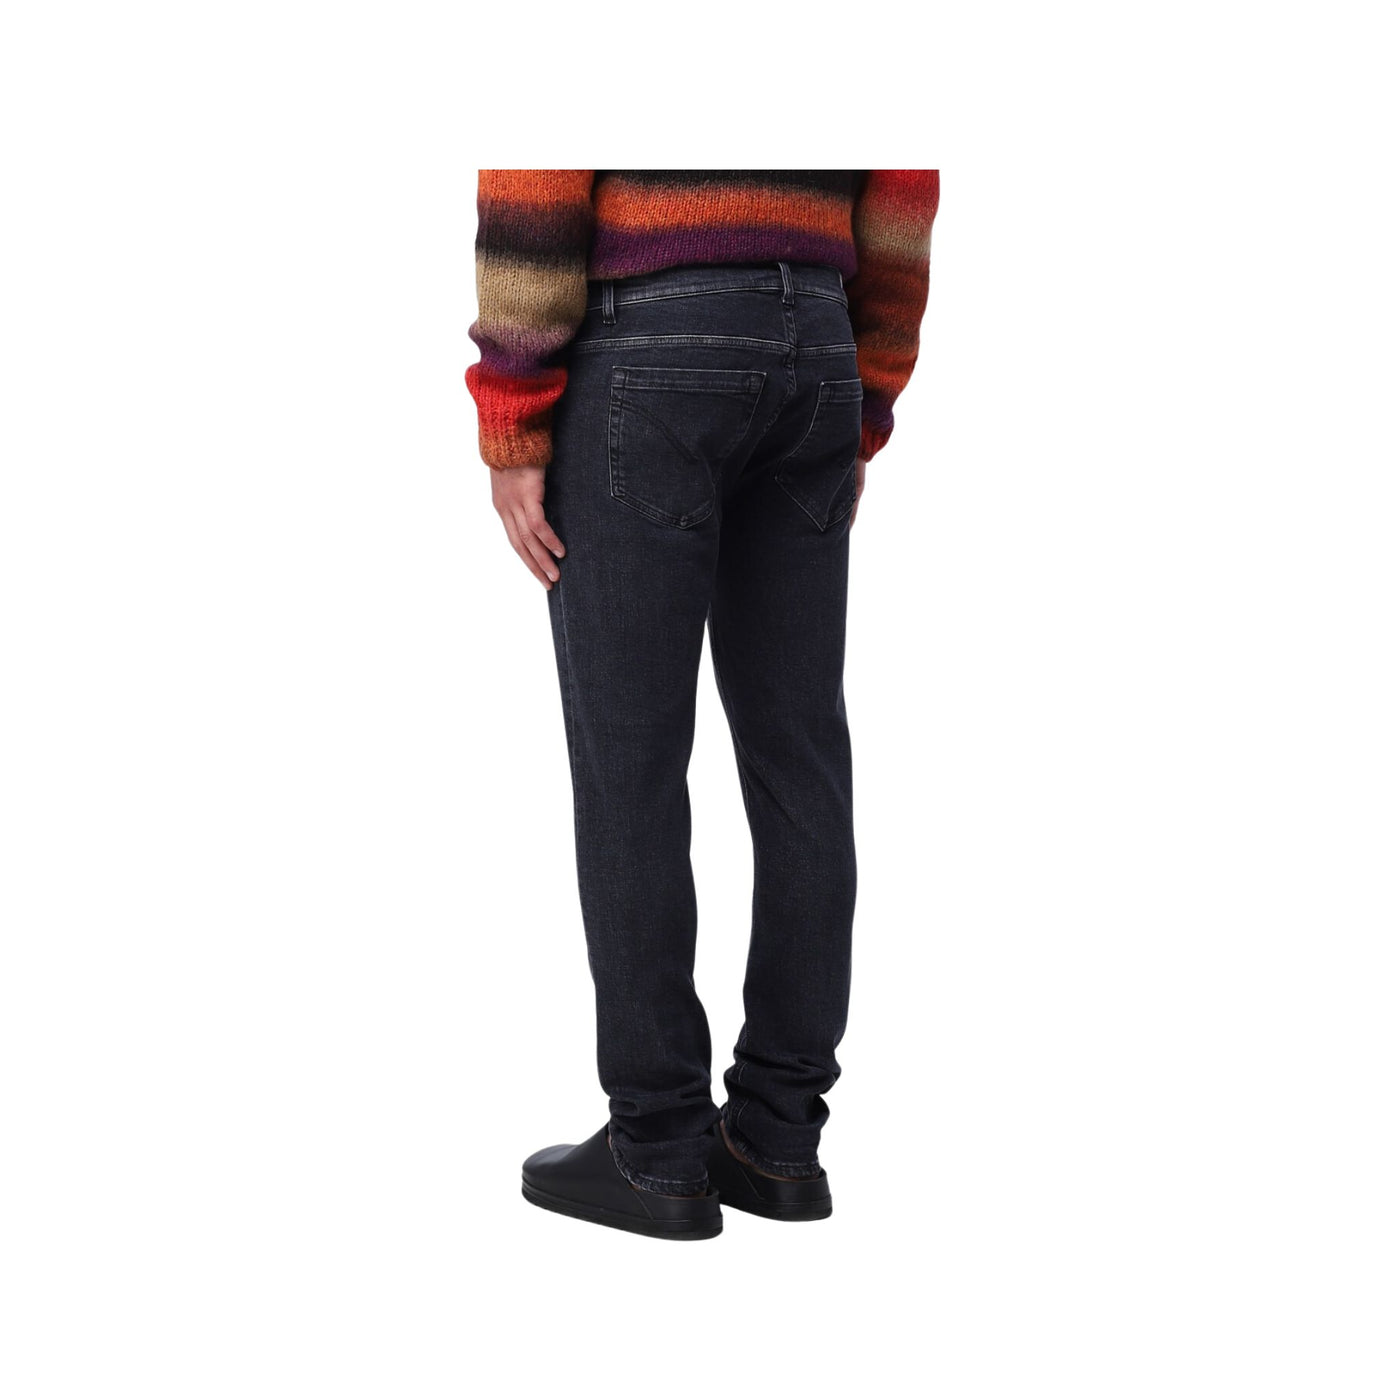 Men's jeans with regular waist and five pockets